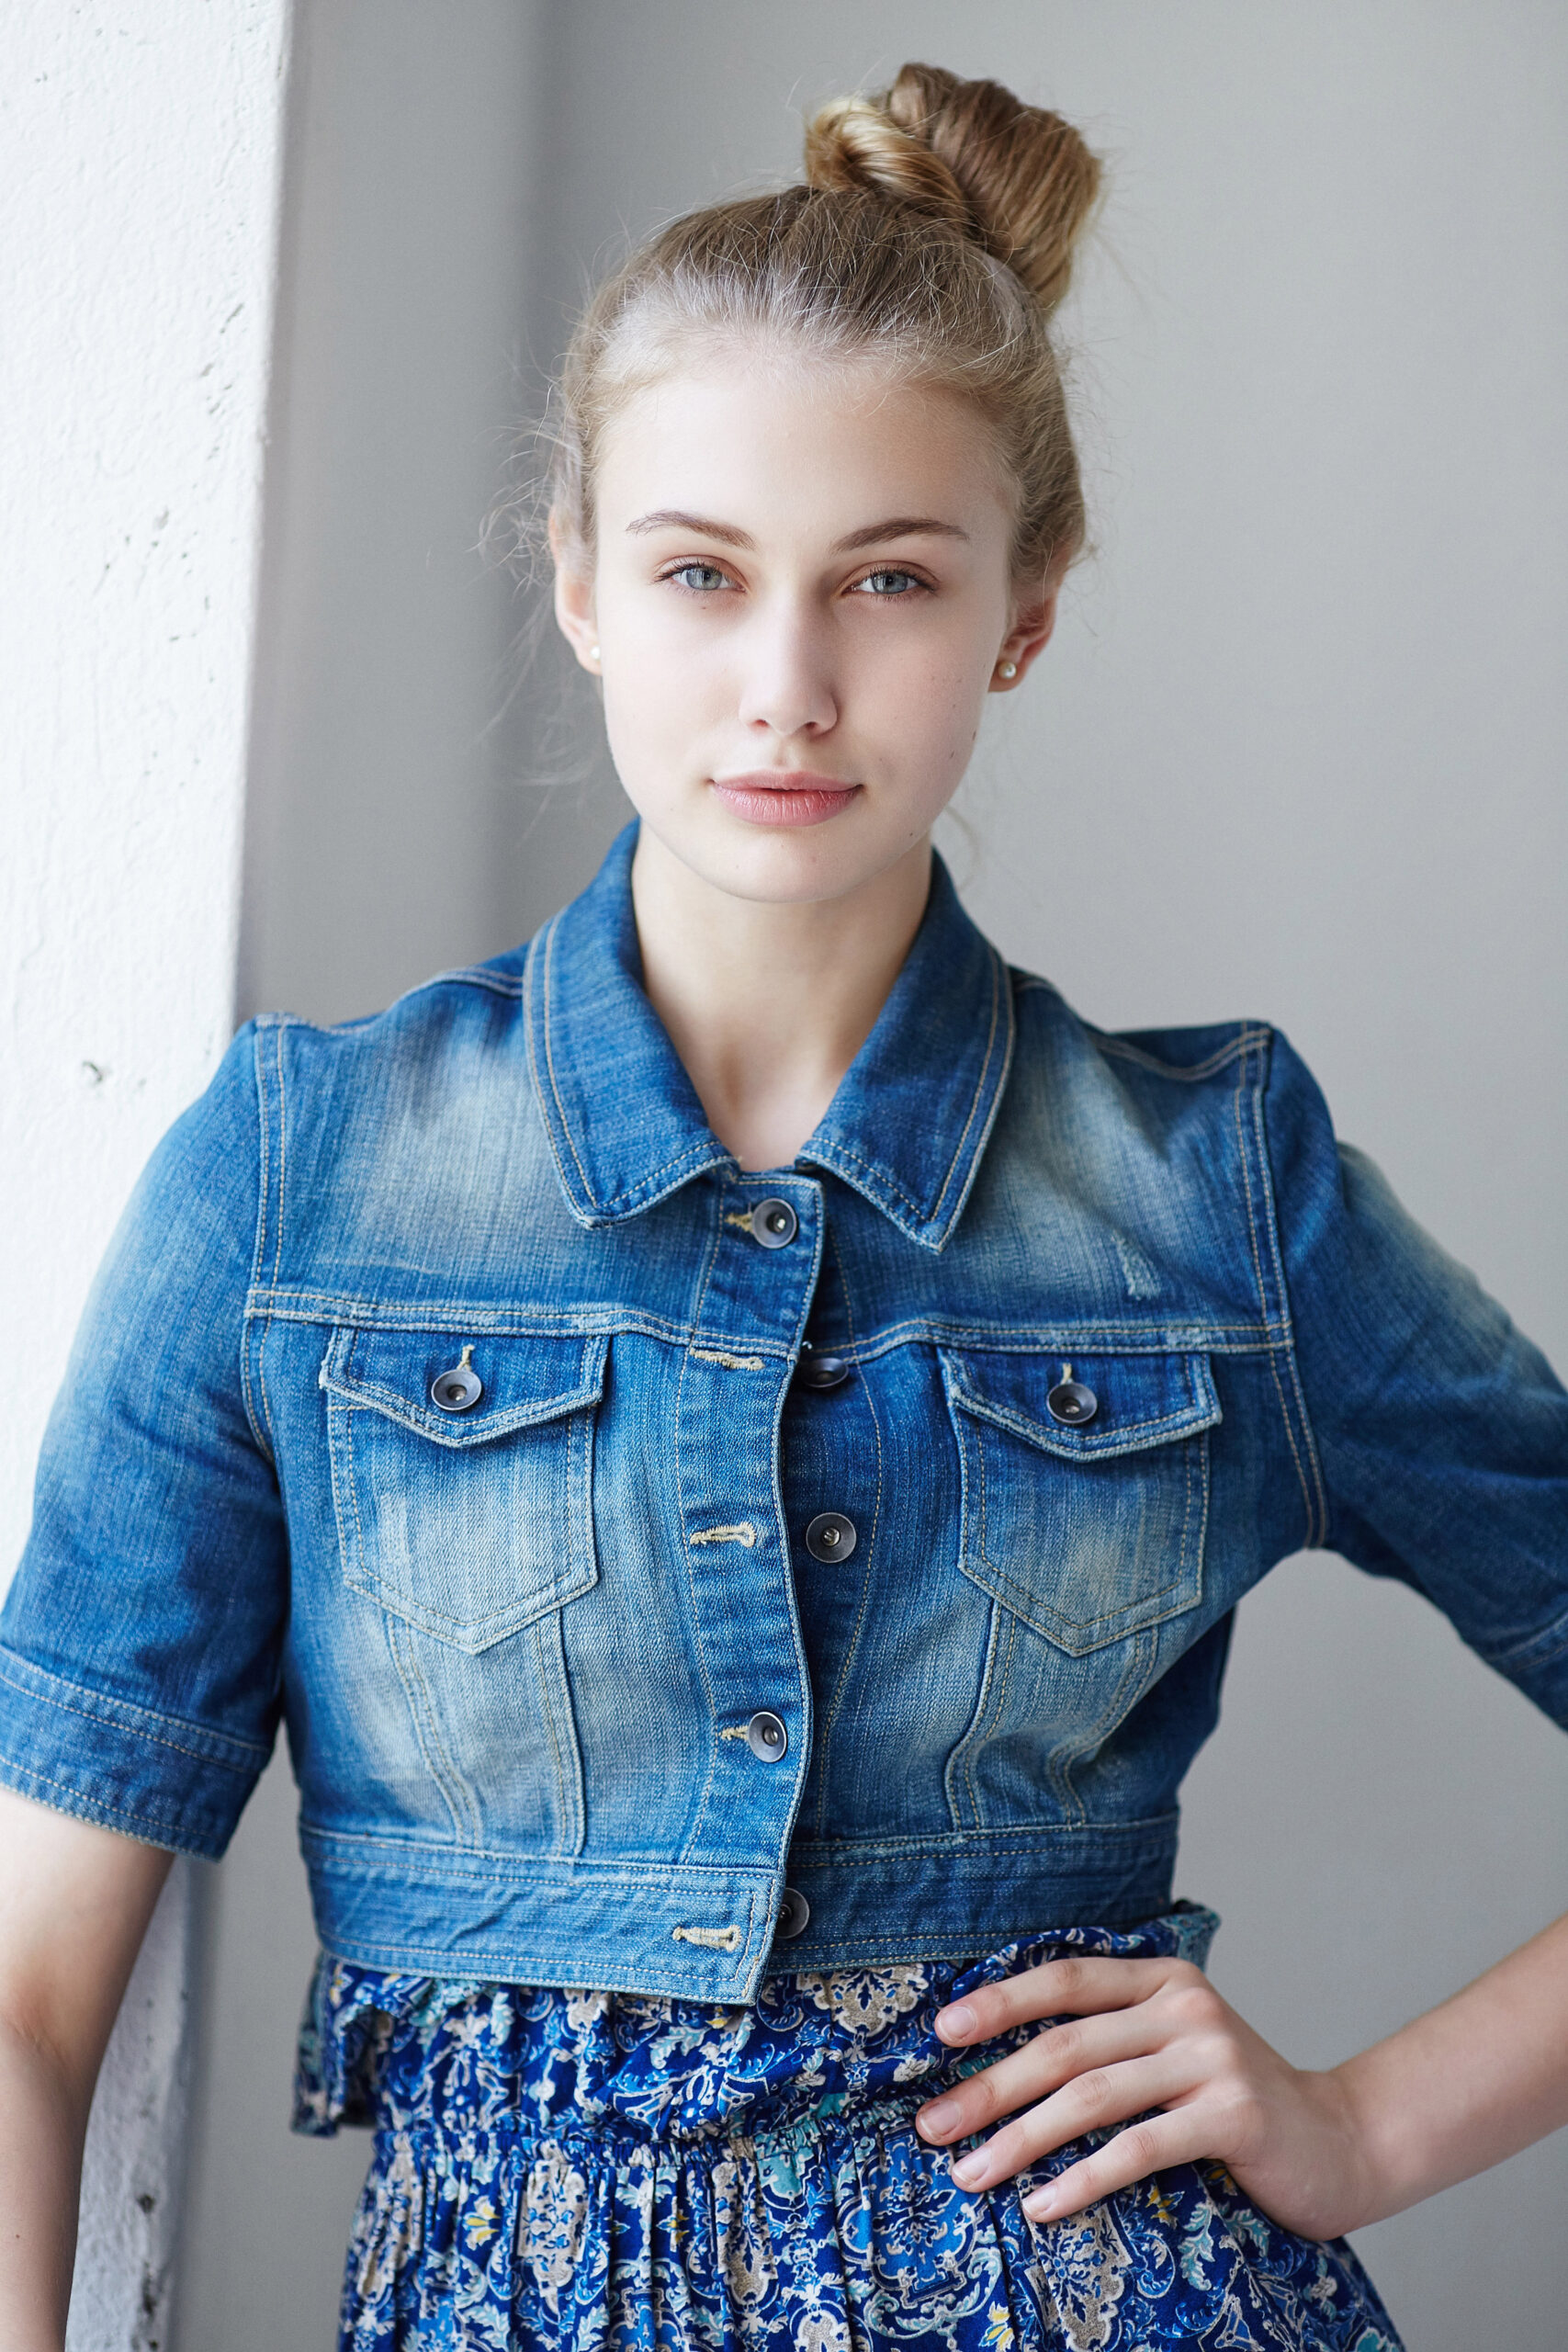 short denim jacket-Top 10 trending styles of denim jackets for men and women.-By live love laugh-2